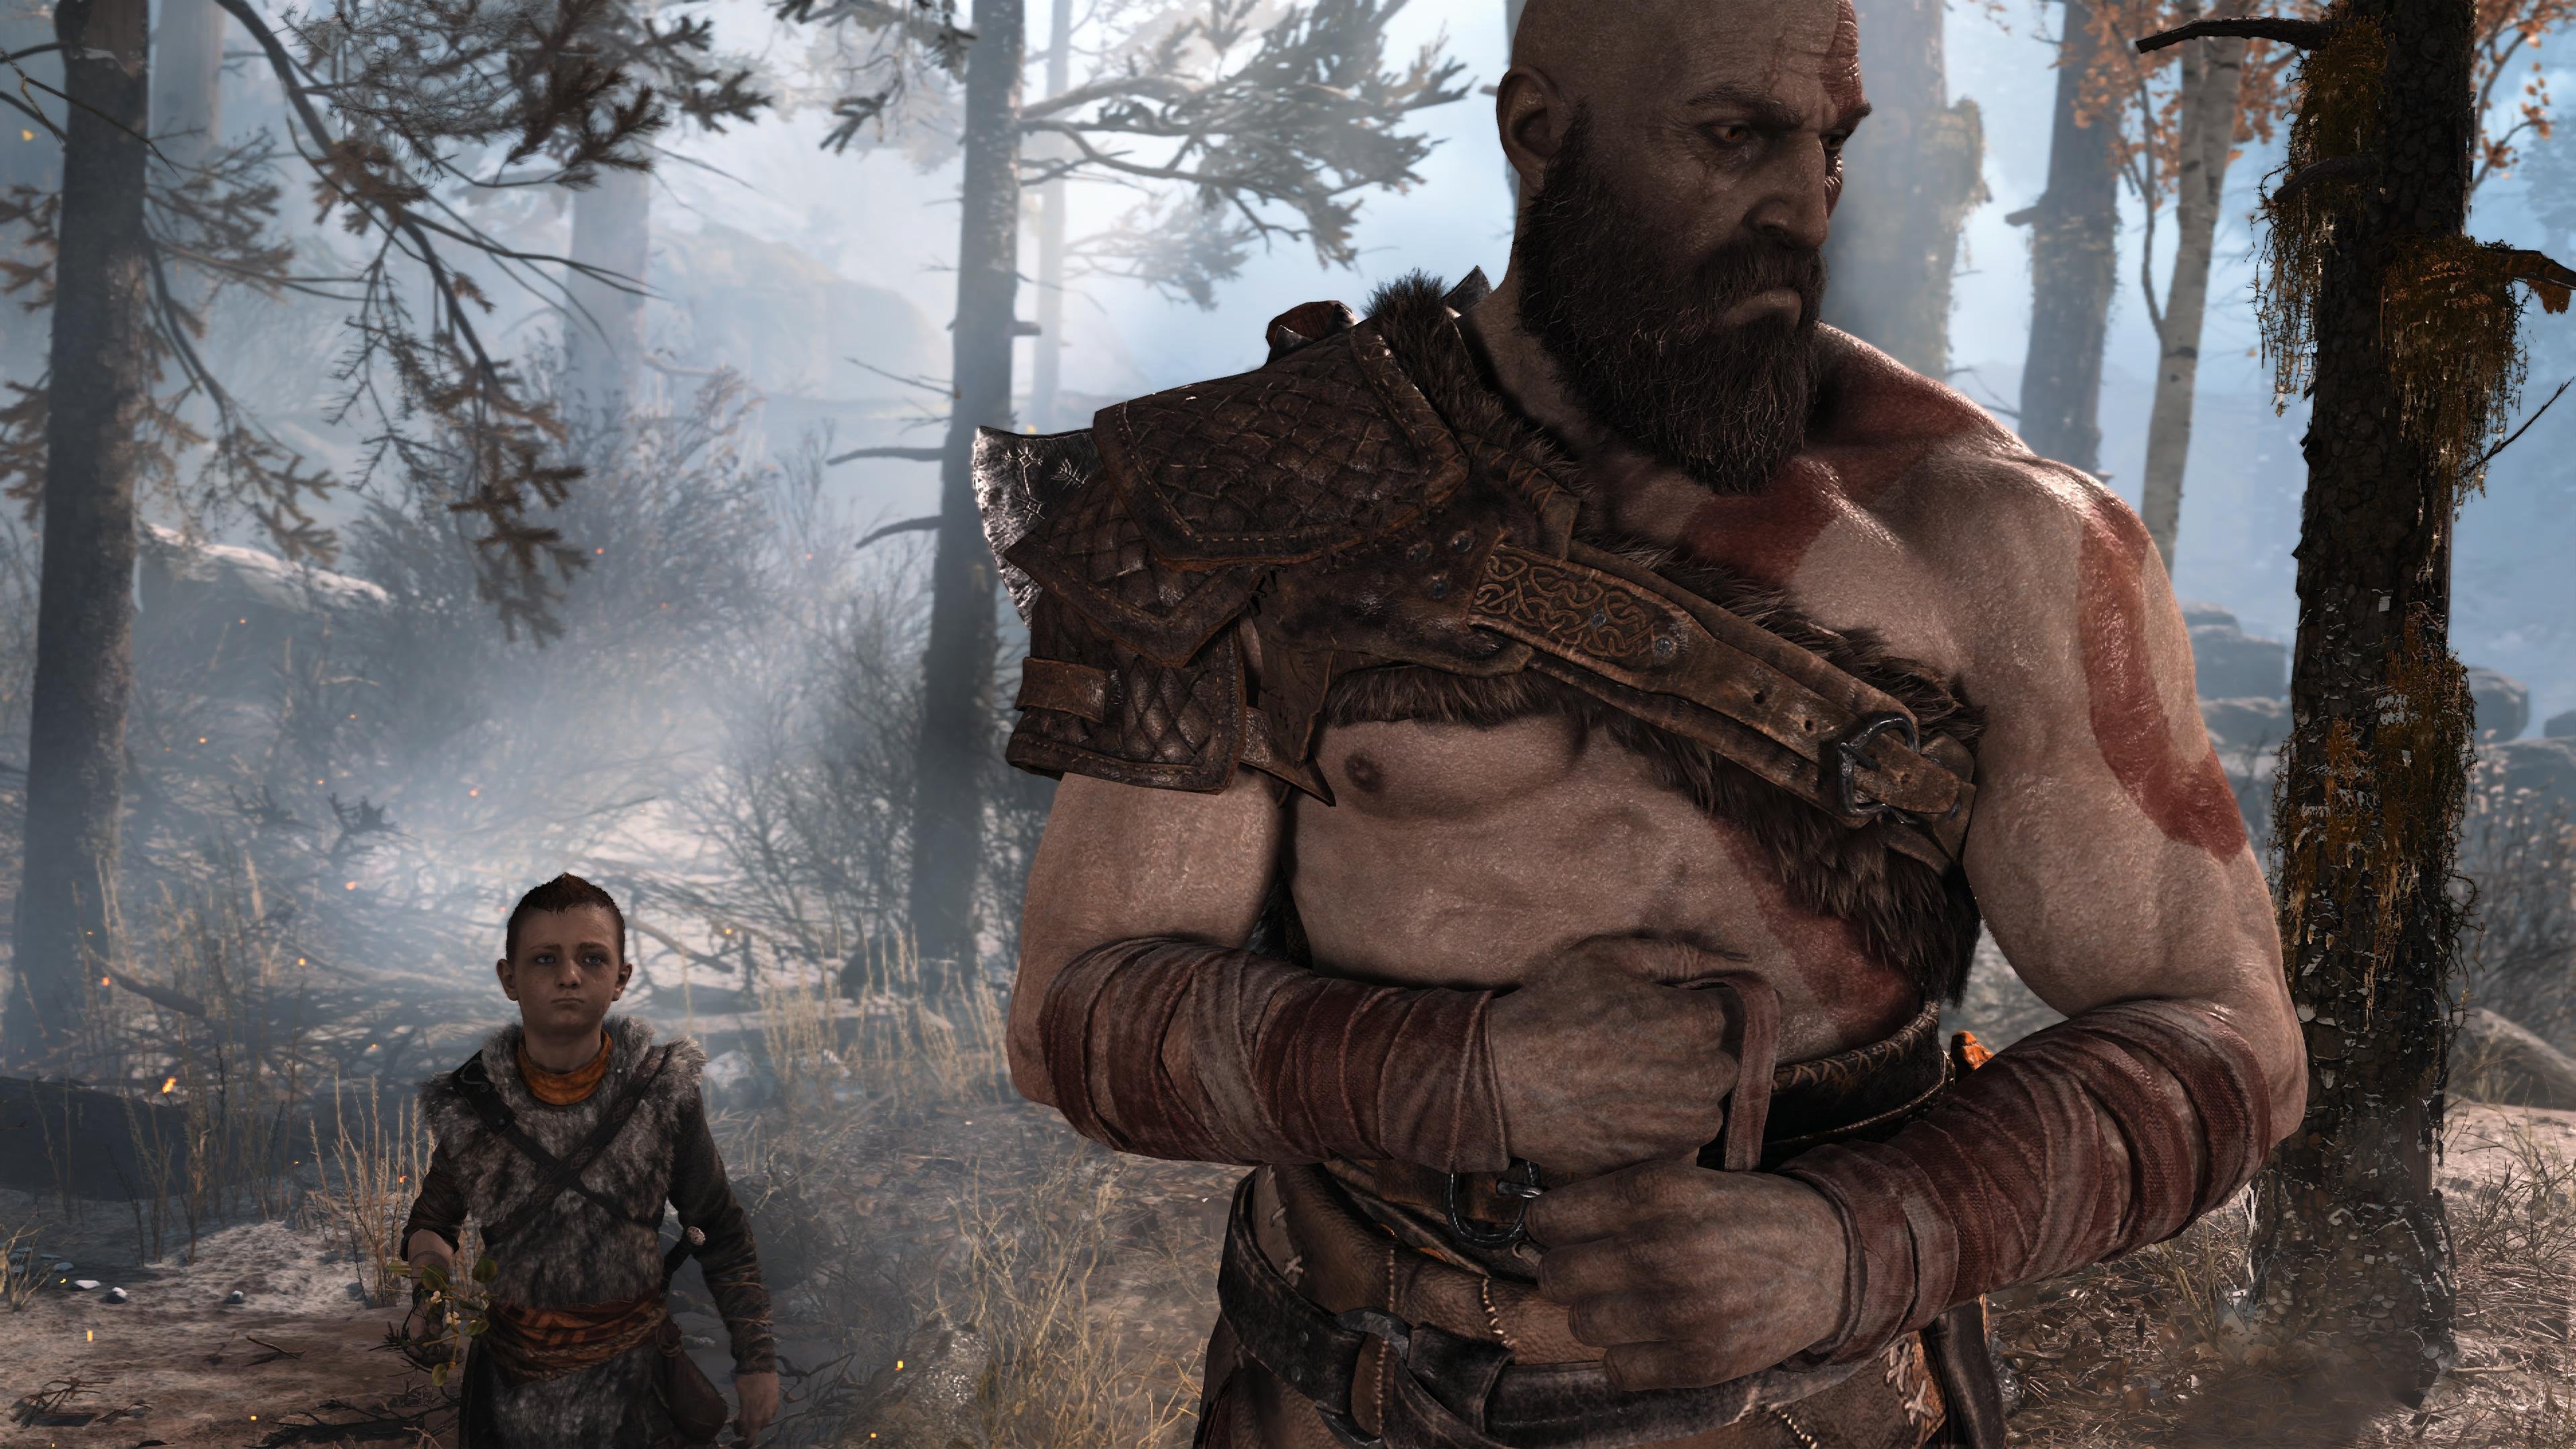 Hands On: God of War PS5 Update Makes for a Truly Godlike Experience